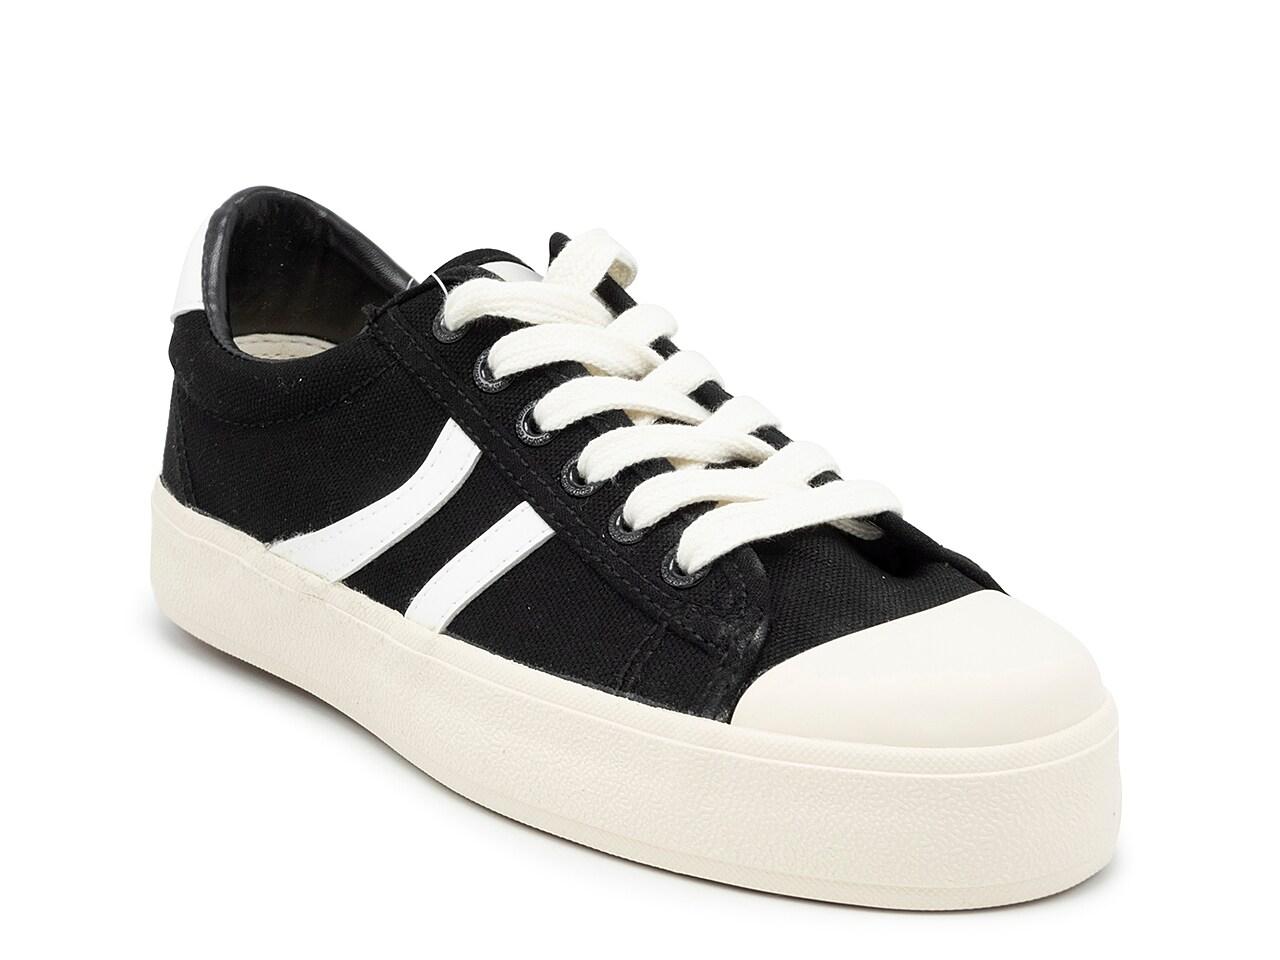 Coolway Iconone Sneaker in Black | Lyst